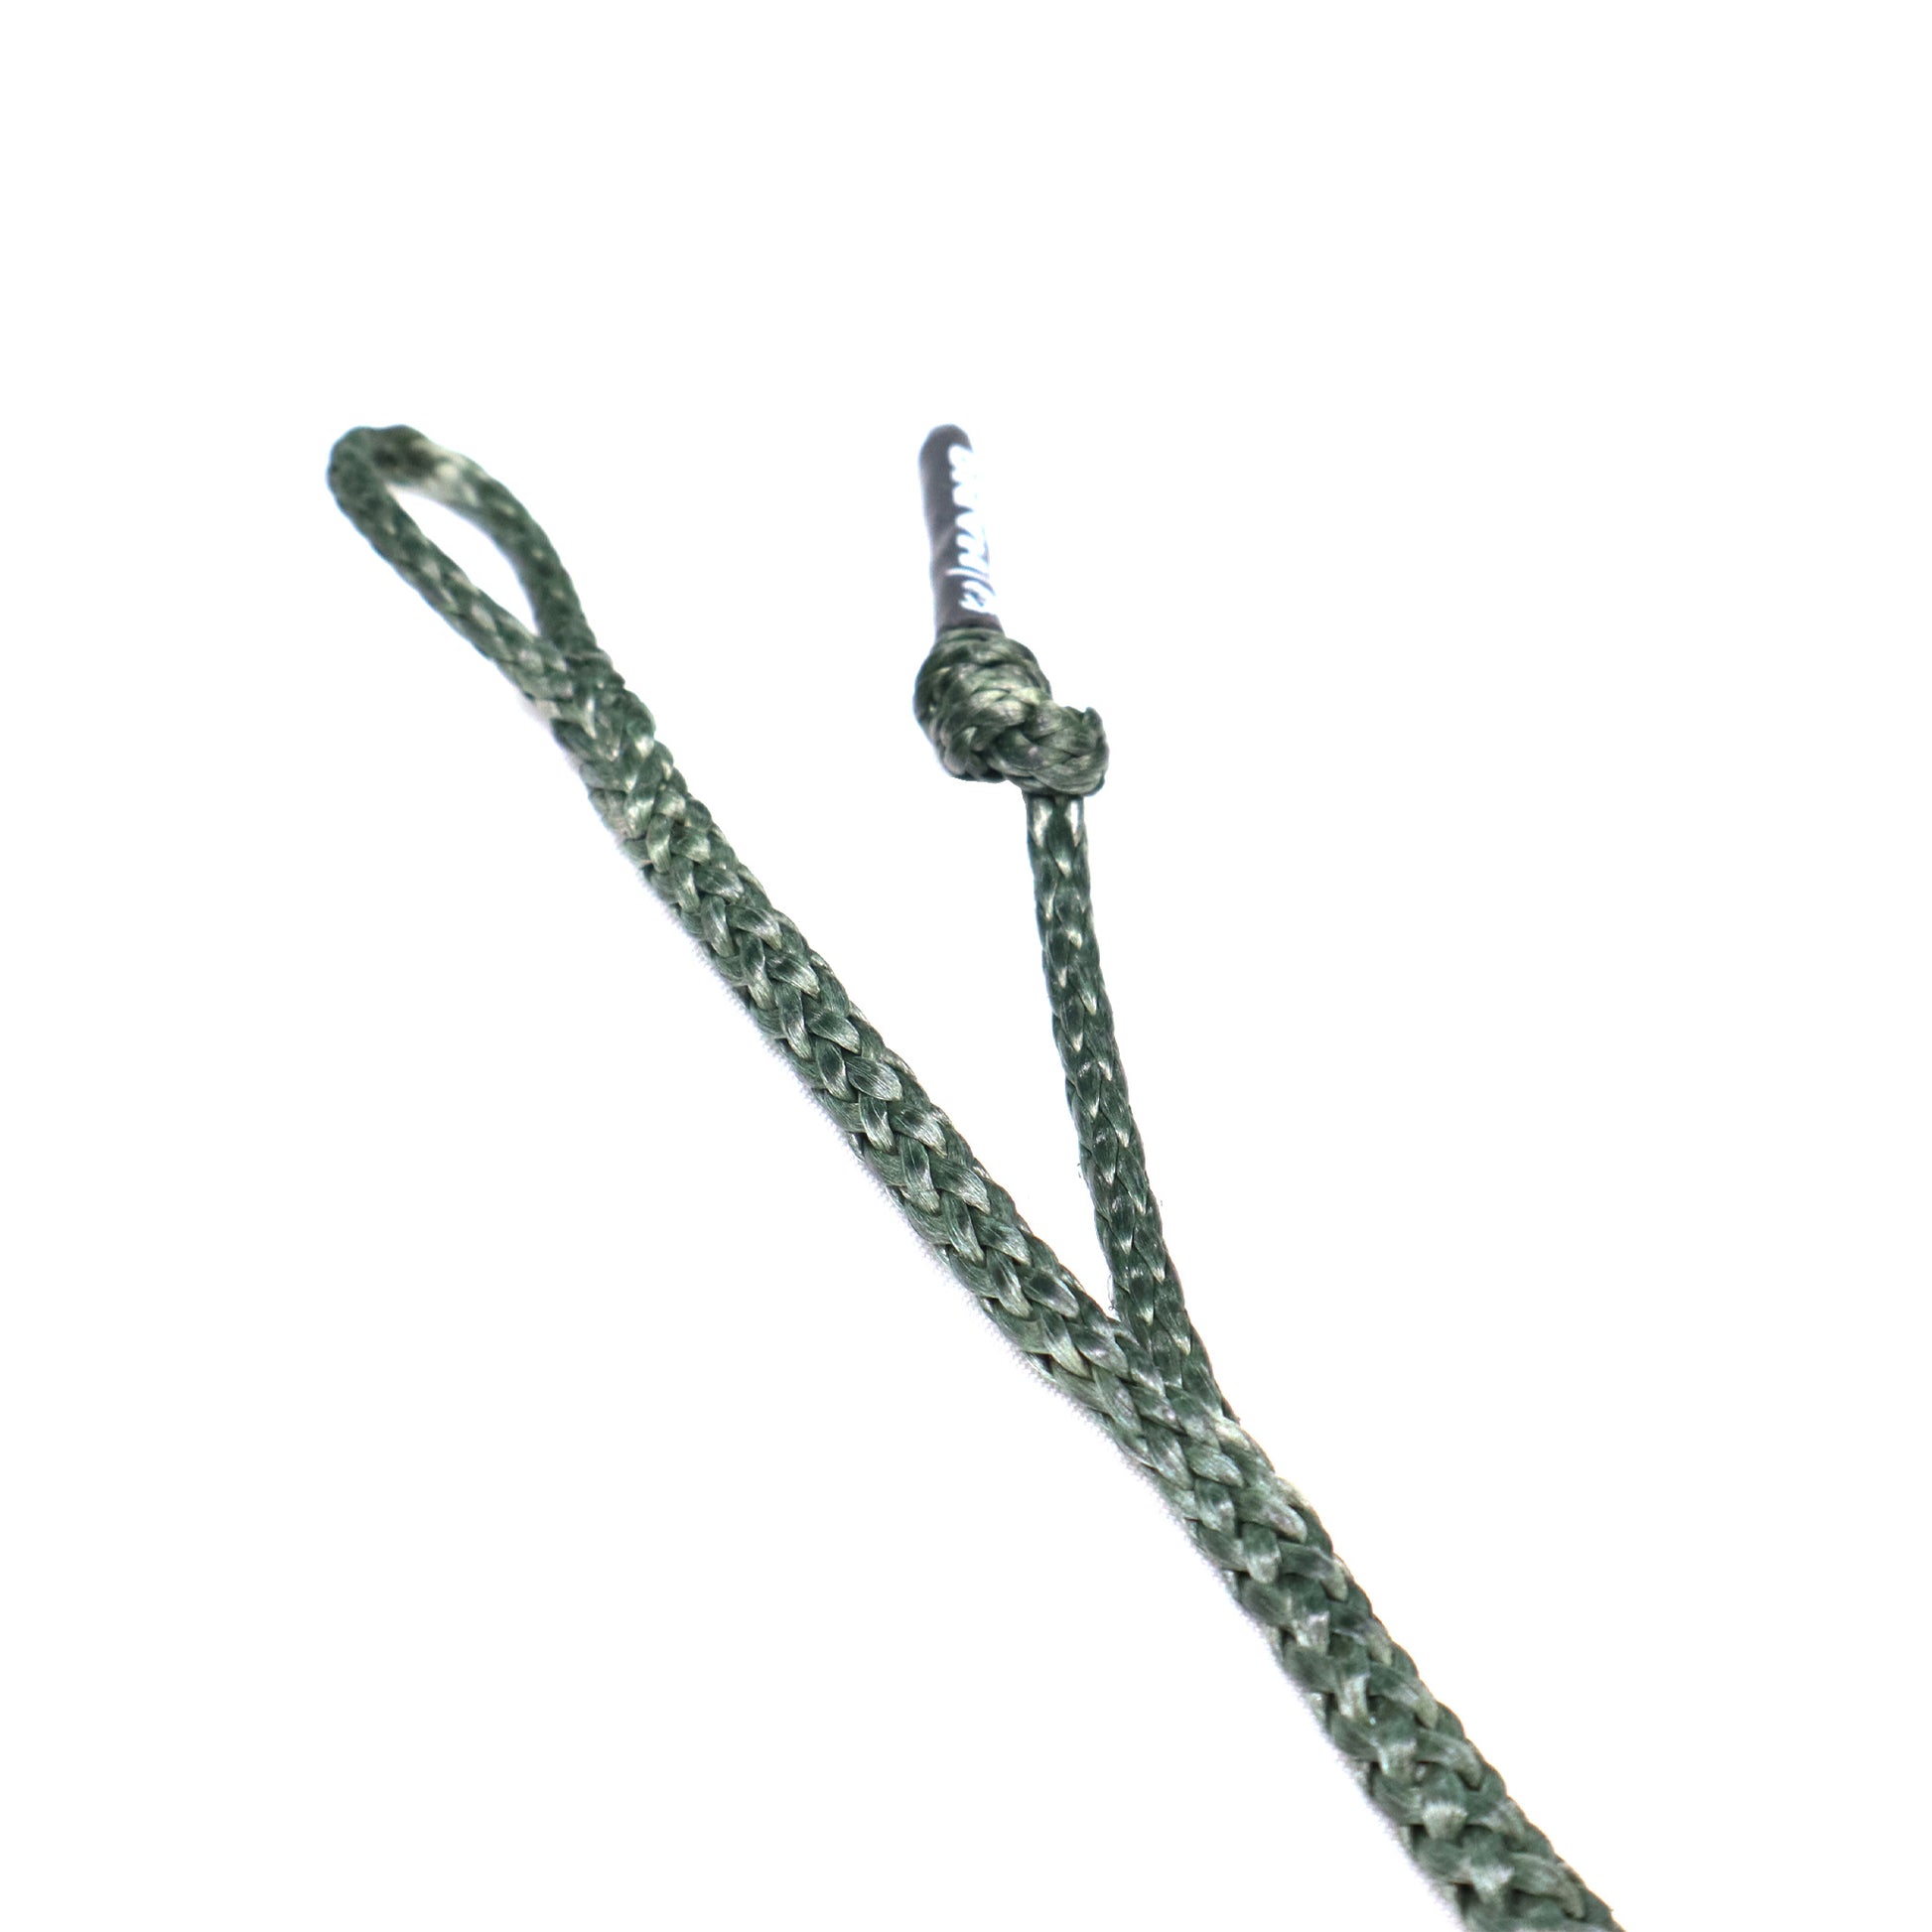 Olive Green AmSteel®-Blue Gear Zips Close UP